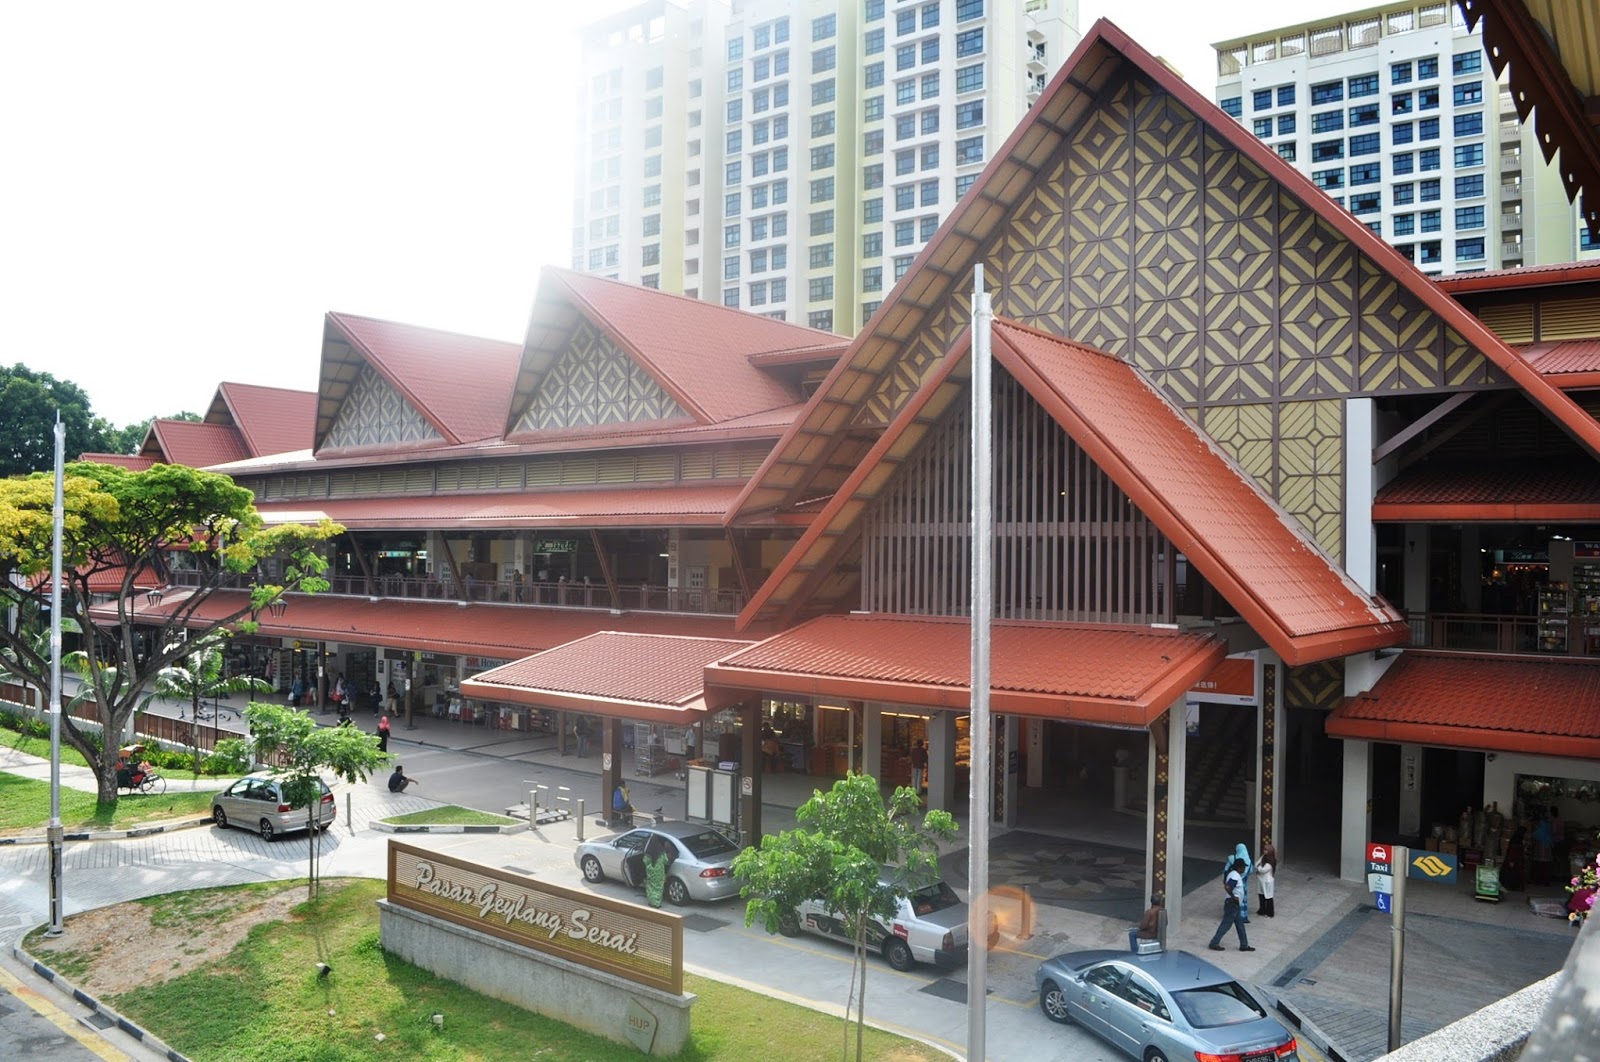 Geylang Serai Market - one of the oldest heritage markets in Singapore